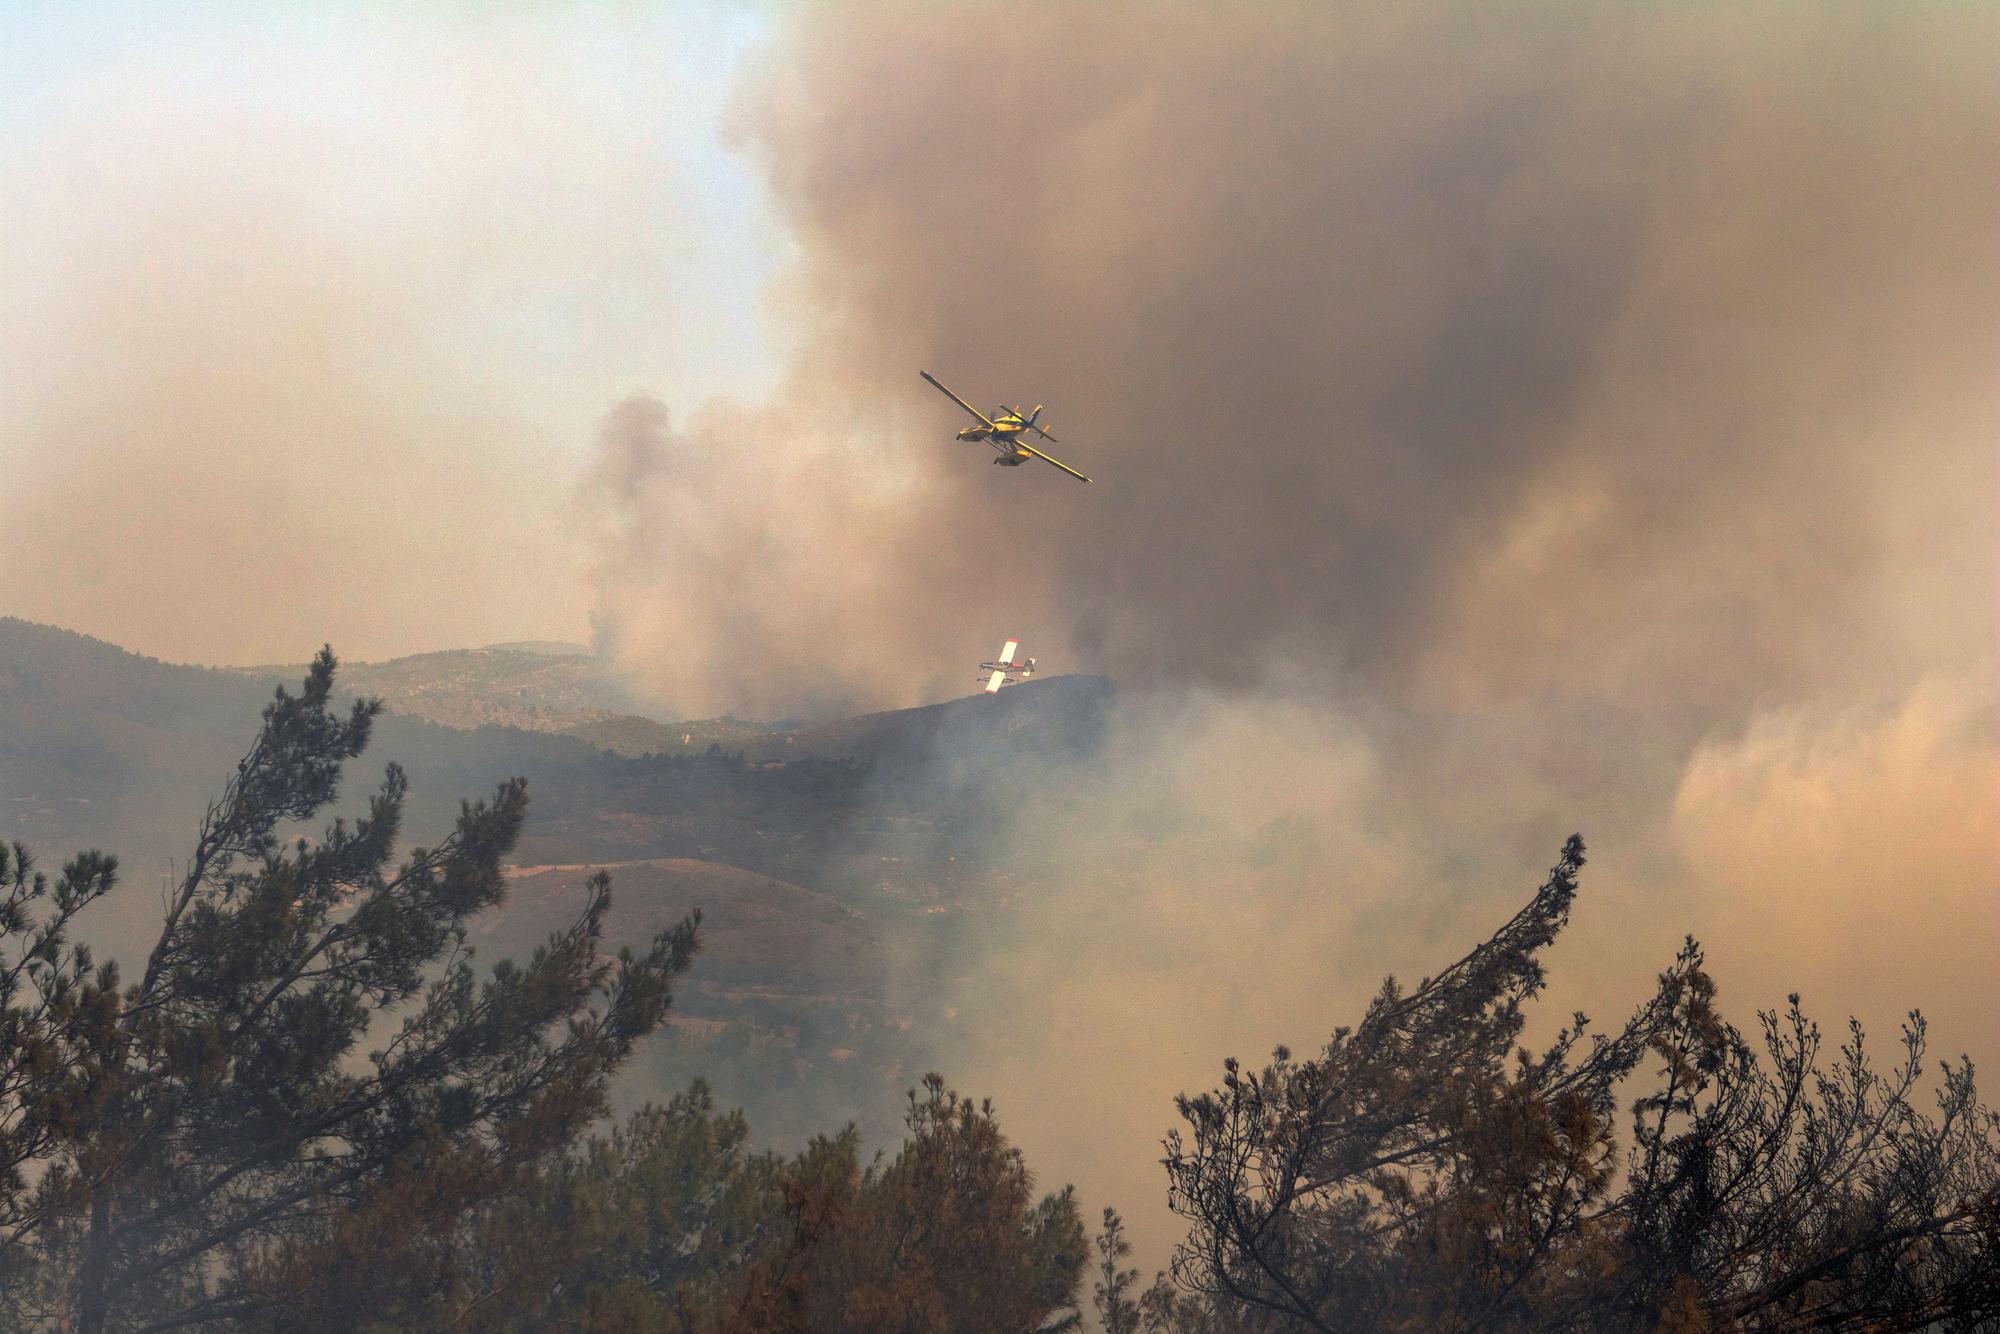 Rhodes raging fires forced largest evacuation operation ever in Greece